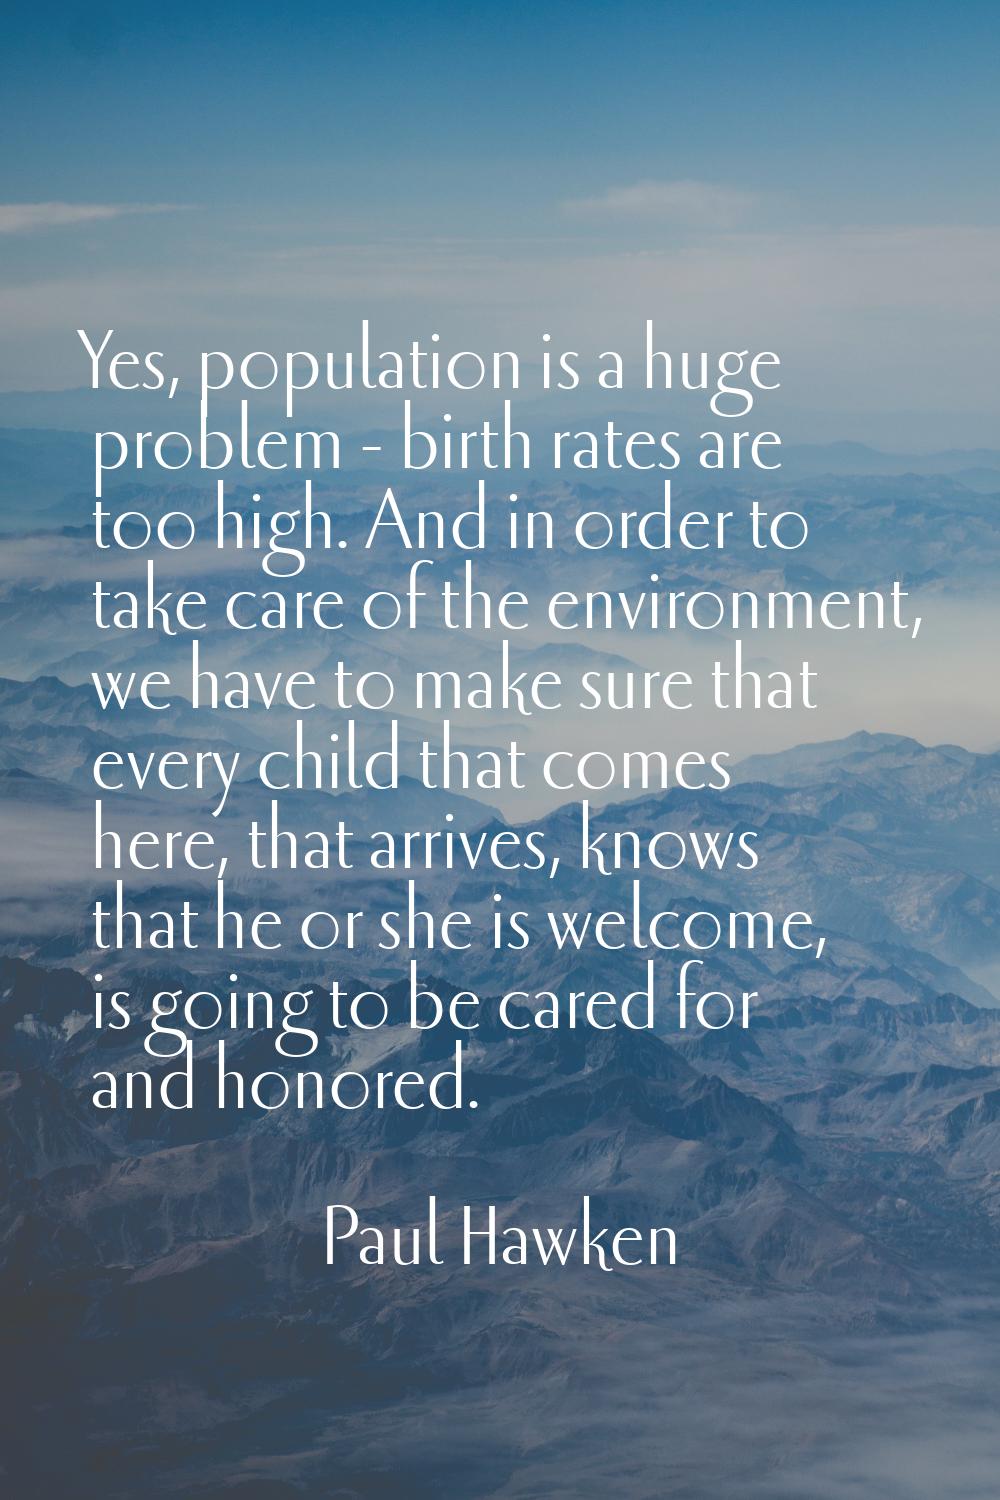 Yes, population is a huge problem - birth rates are too high. And in order to take care of the envi